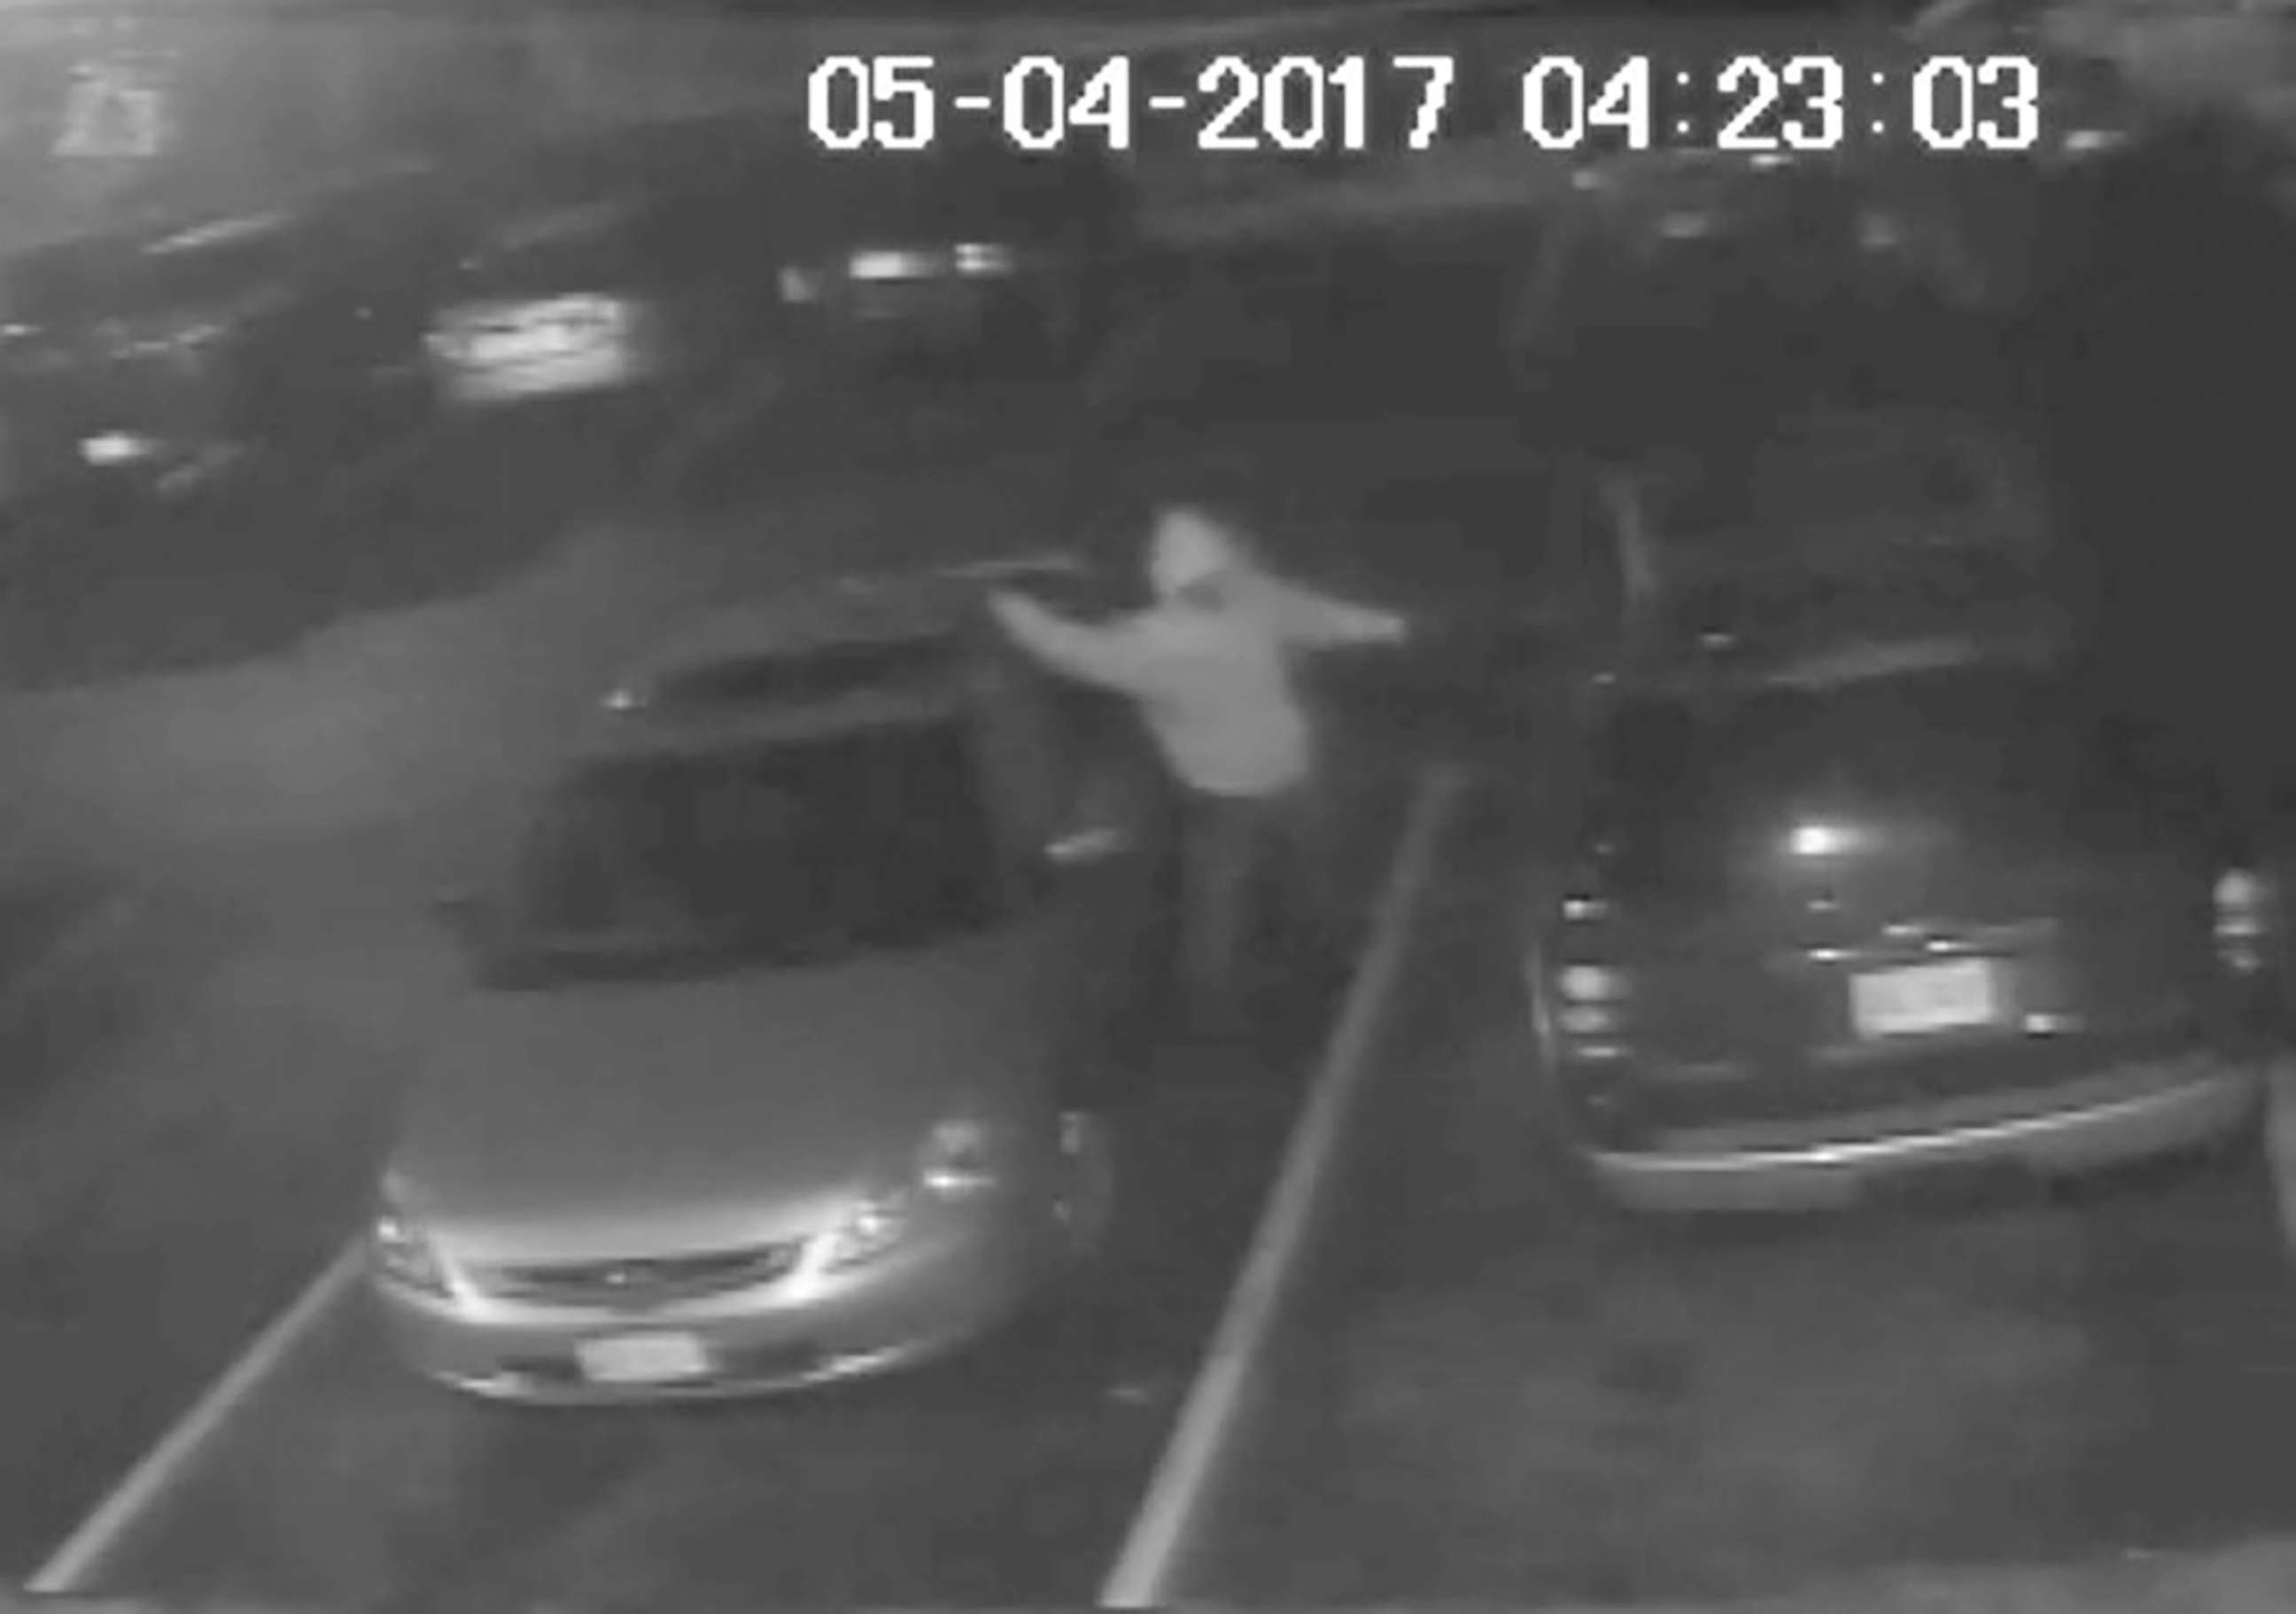 PHOTO: A single subject is captured on surveillance video during the vandalism incident on May 4, 2017.